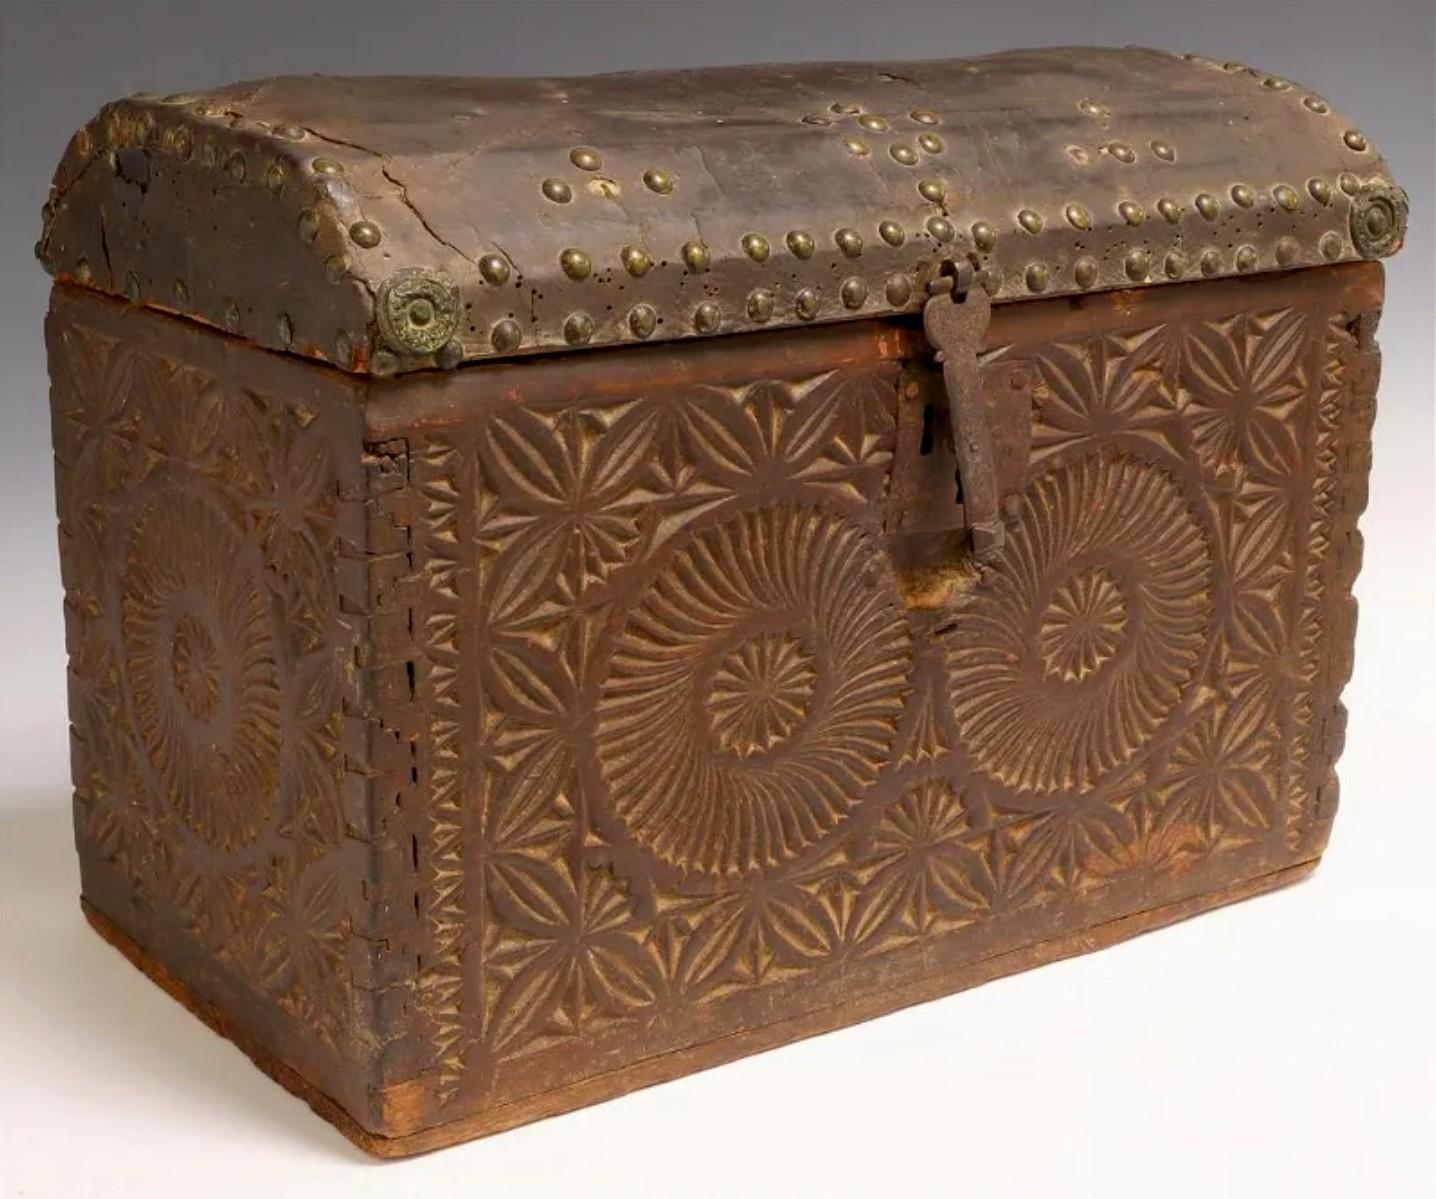 A scarce 300-year-old Spanish Colonial period leather clad and carved travel chest with beautifully aged patina. circa 1725

Born in the first half of the 18th century, this small scale chest would have been used by a Spanish colonist / settler